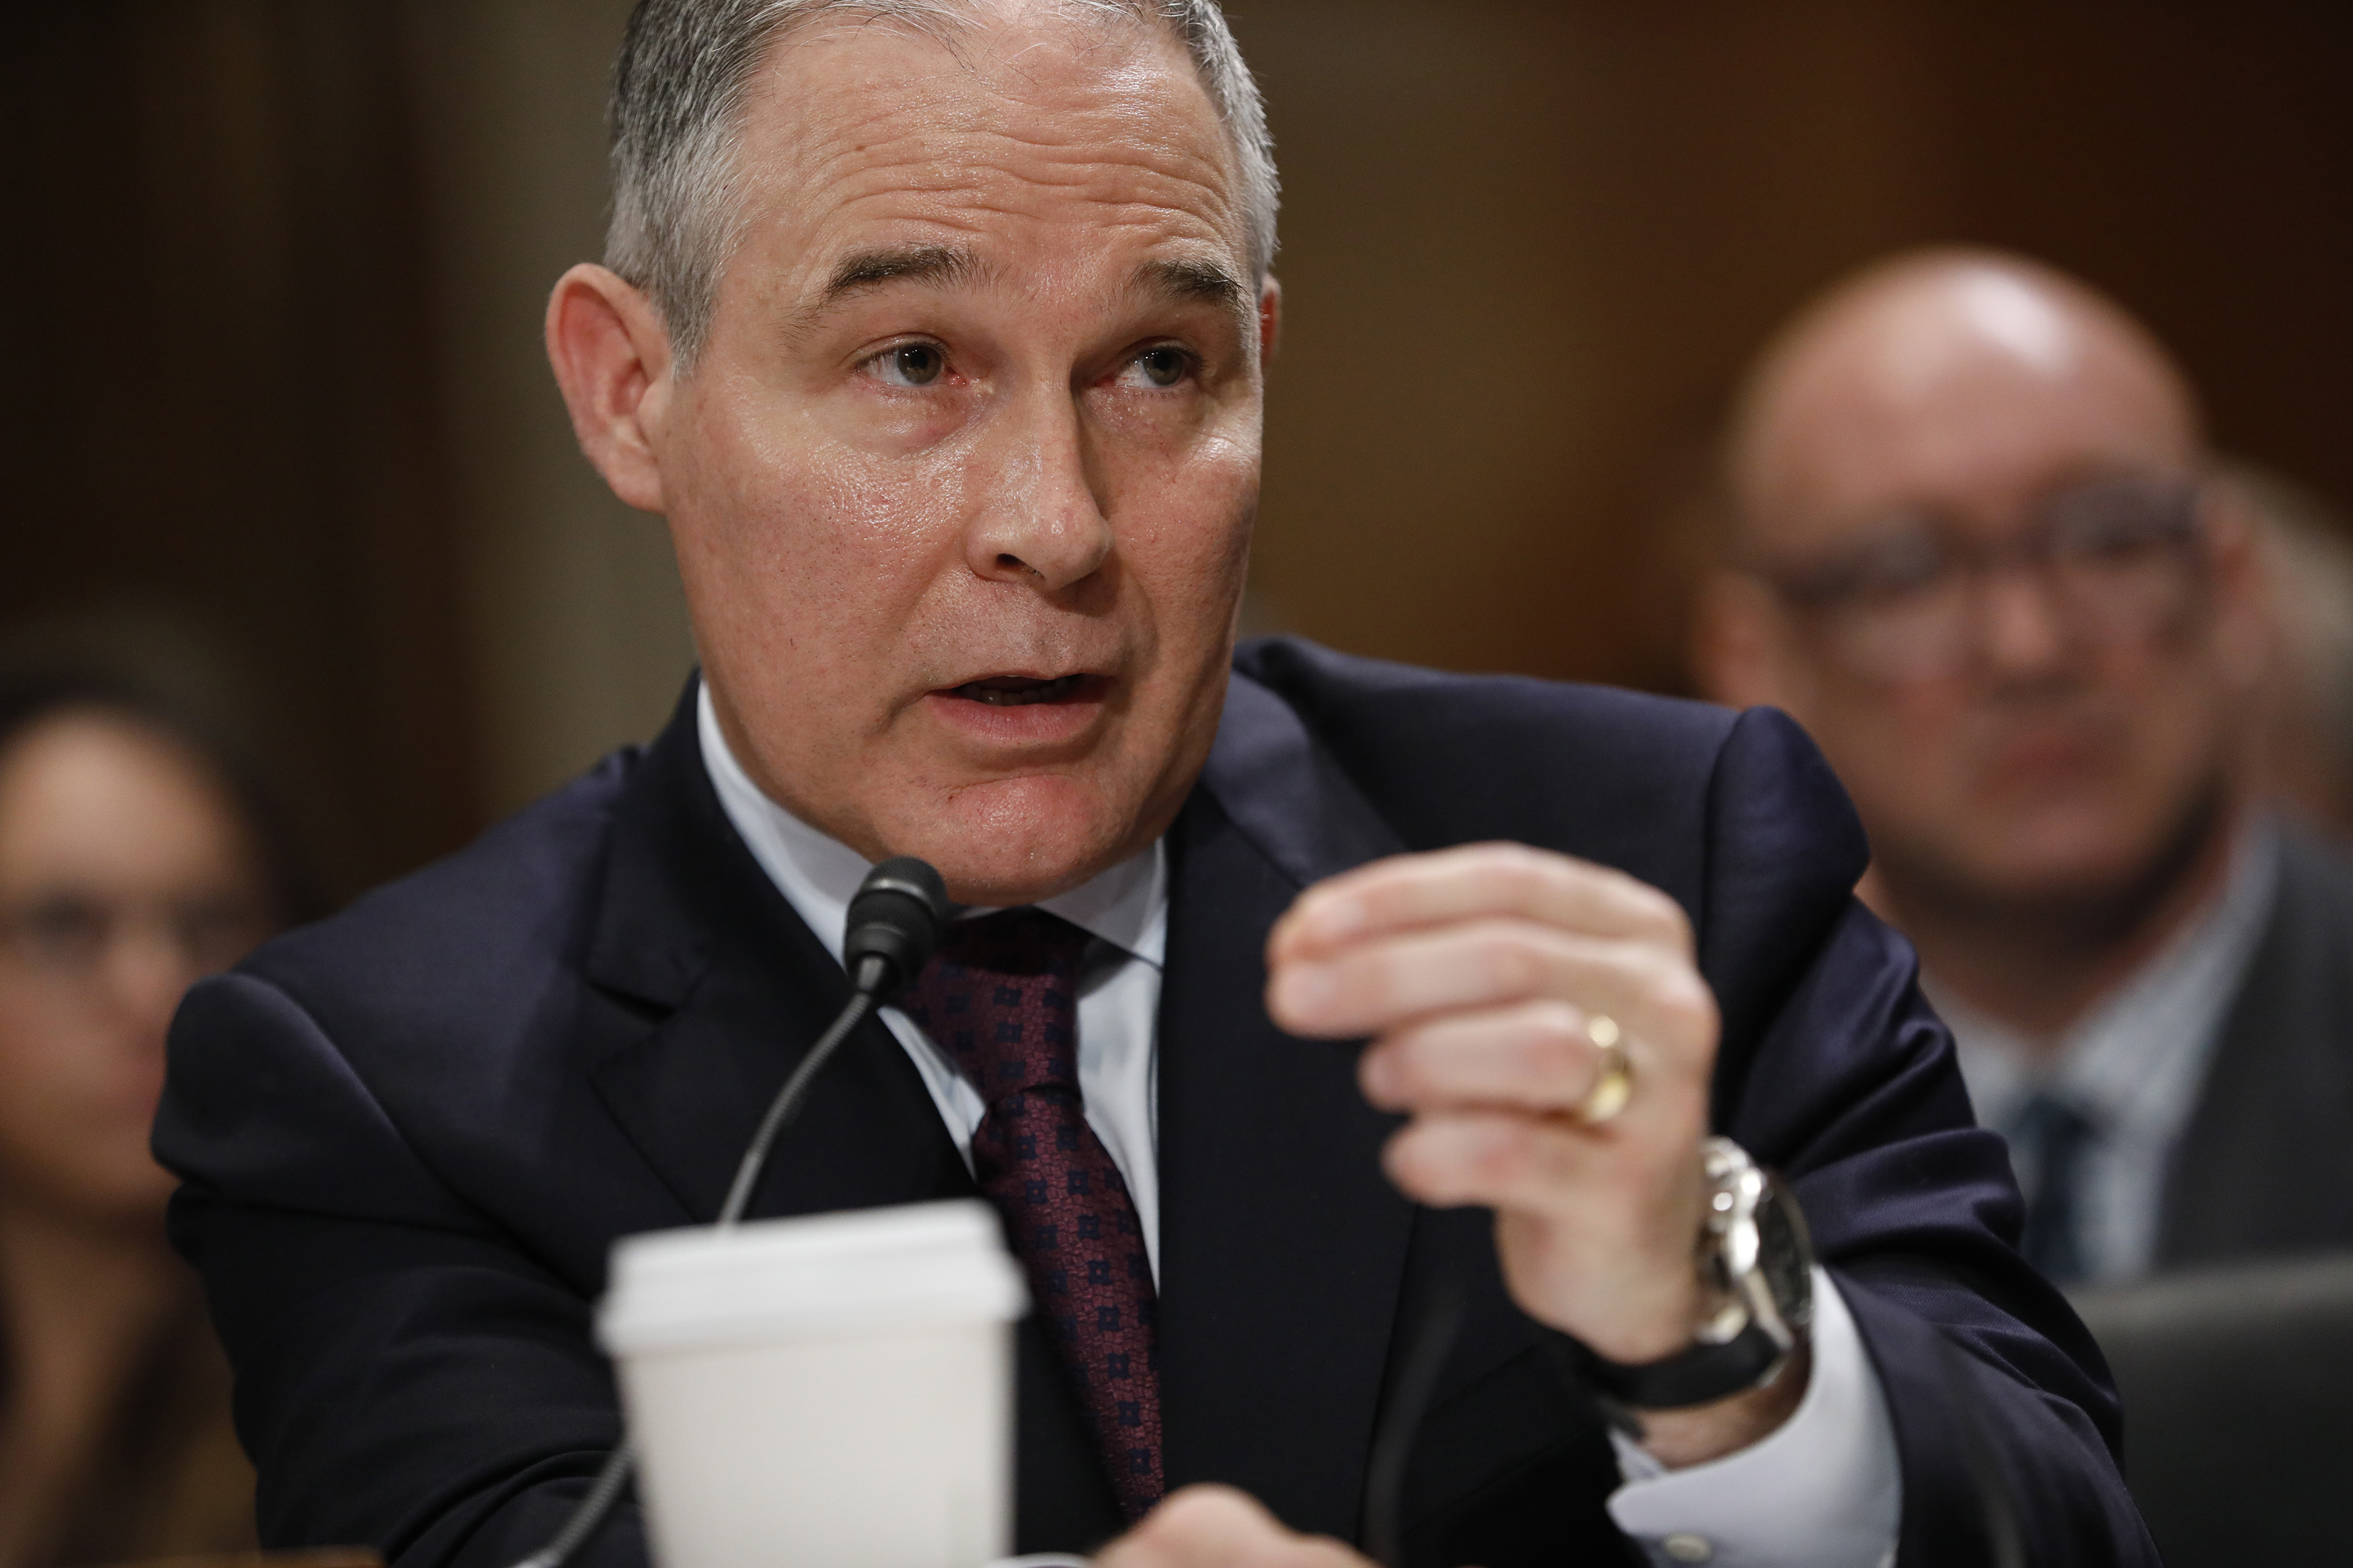 Oklahoma Attorney General Scott Pruitt, President-elect Donald Trump's choice to head the Environmental Protection Agency, testifies during his confirmation hearing before the Senate Committee on Environment and Public Works on Capitol Hill on Jan. 18 in Washington, DC. (Aaron P. Bernstein—Getty Images)